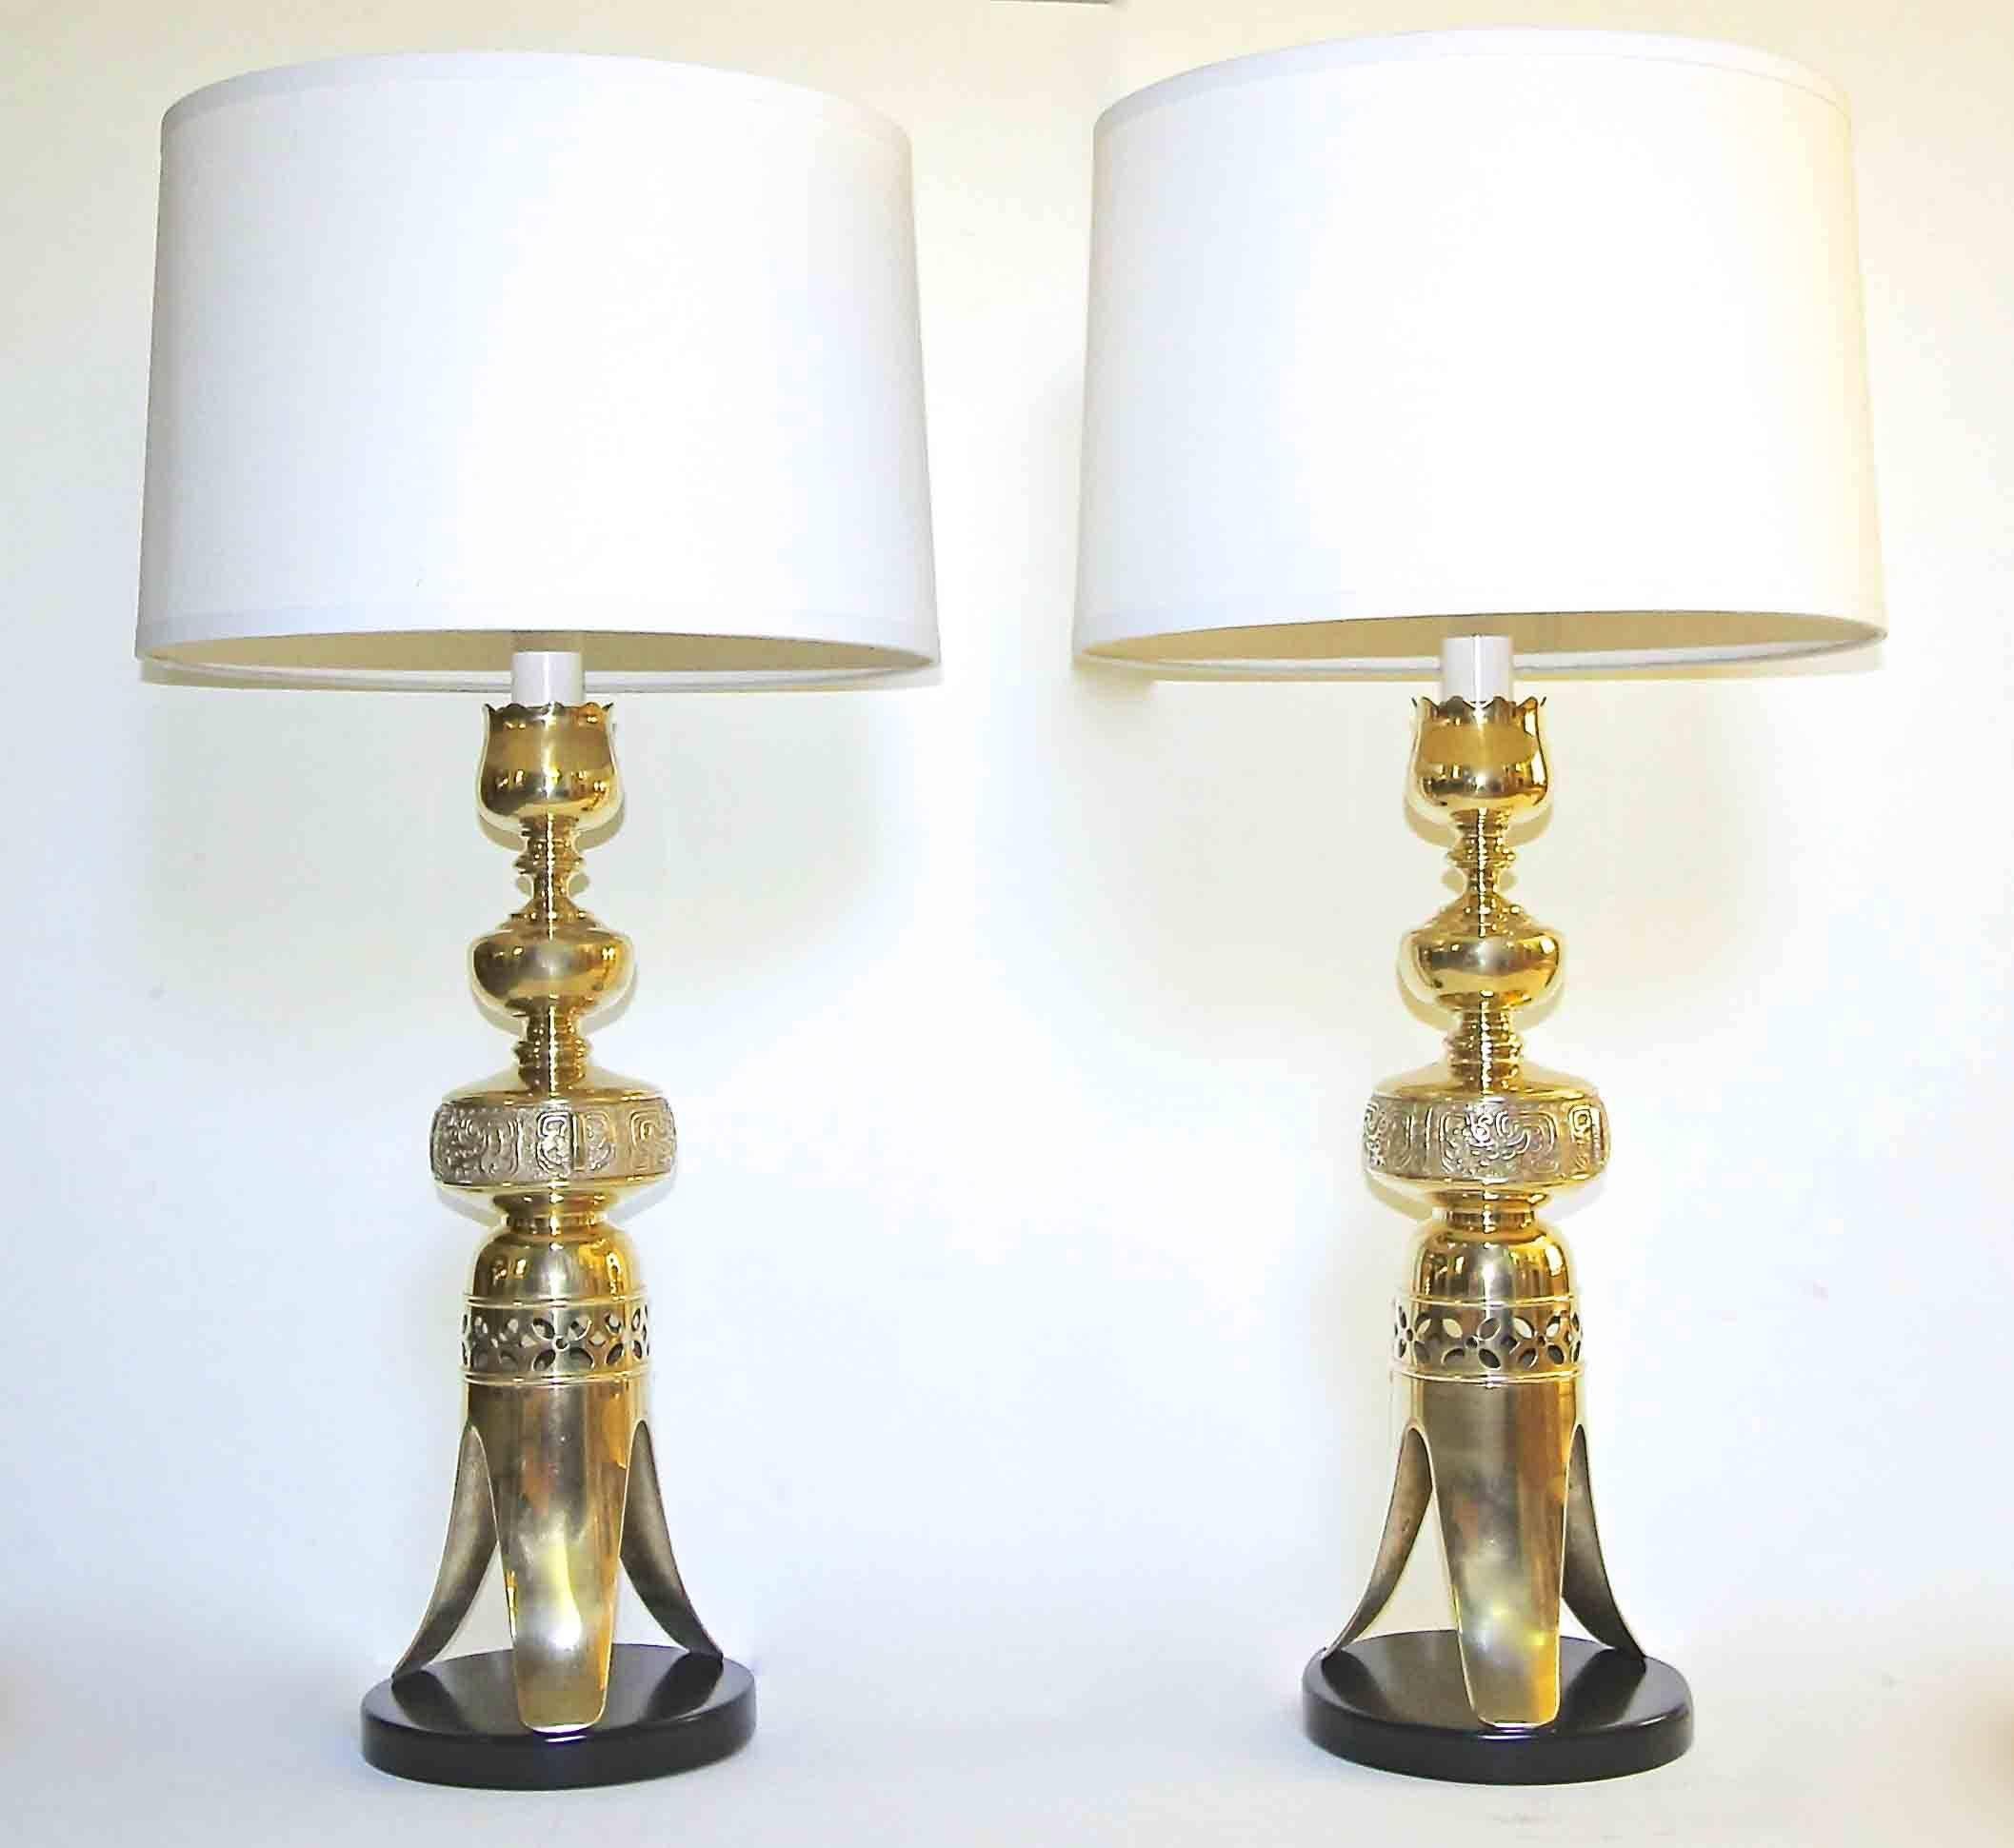 Pair of tall Japanese solid brass altar candlesticks converted to table lamps resting on black painted wood bases in the manner of James Mont. Newly wired for US with solid brass fittings, double on/off pull sockets and French style rayon covered